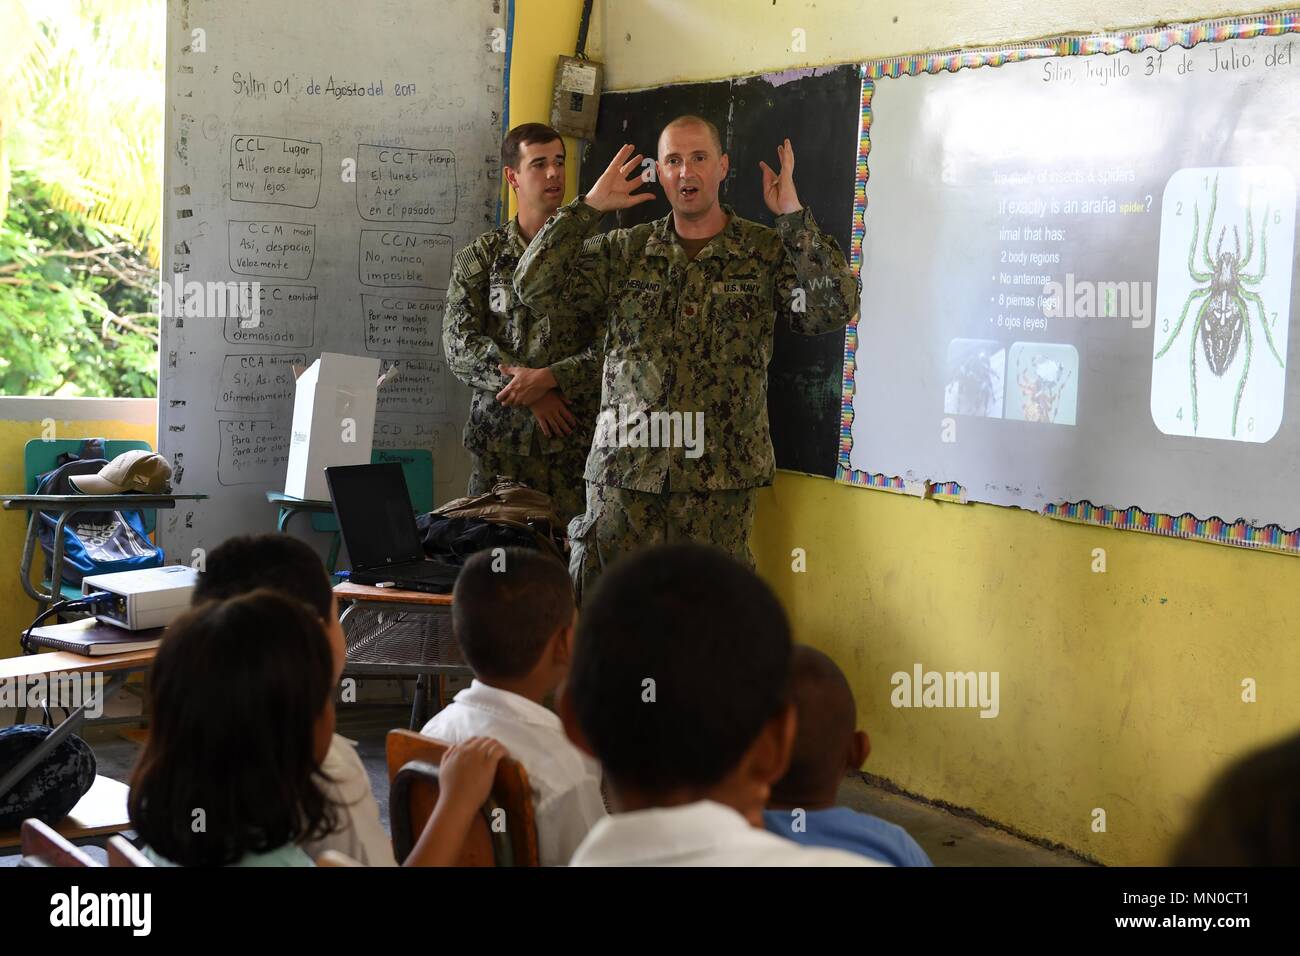 170801-N-BK435-0101 SILIN, Honduras (Aug. 1, 2017) Lt. Cmdr. Ian Sutherland, technical director for the Navy Entomology Center of Excellence, teaches an entomology class for 78 children at República de Colombia Elementary School during a Southern Partnership Station 17 community relations project (COMREL). SPS-EPF 17 is a U.S. Navy deployment, executed by U.S. Naval Forces Southern Command/U.S. 4th Fleet, focused on subject matter expert exchanges with partner nation militaries and security forces in Central and South America. (U.S. Navy photo by Mass Communication Specialist 1st Class Jeremy  Stock Photo